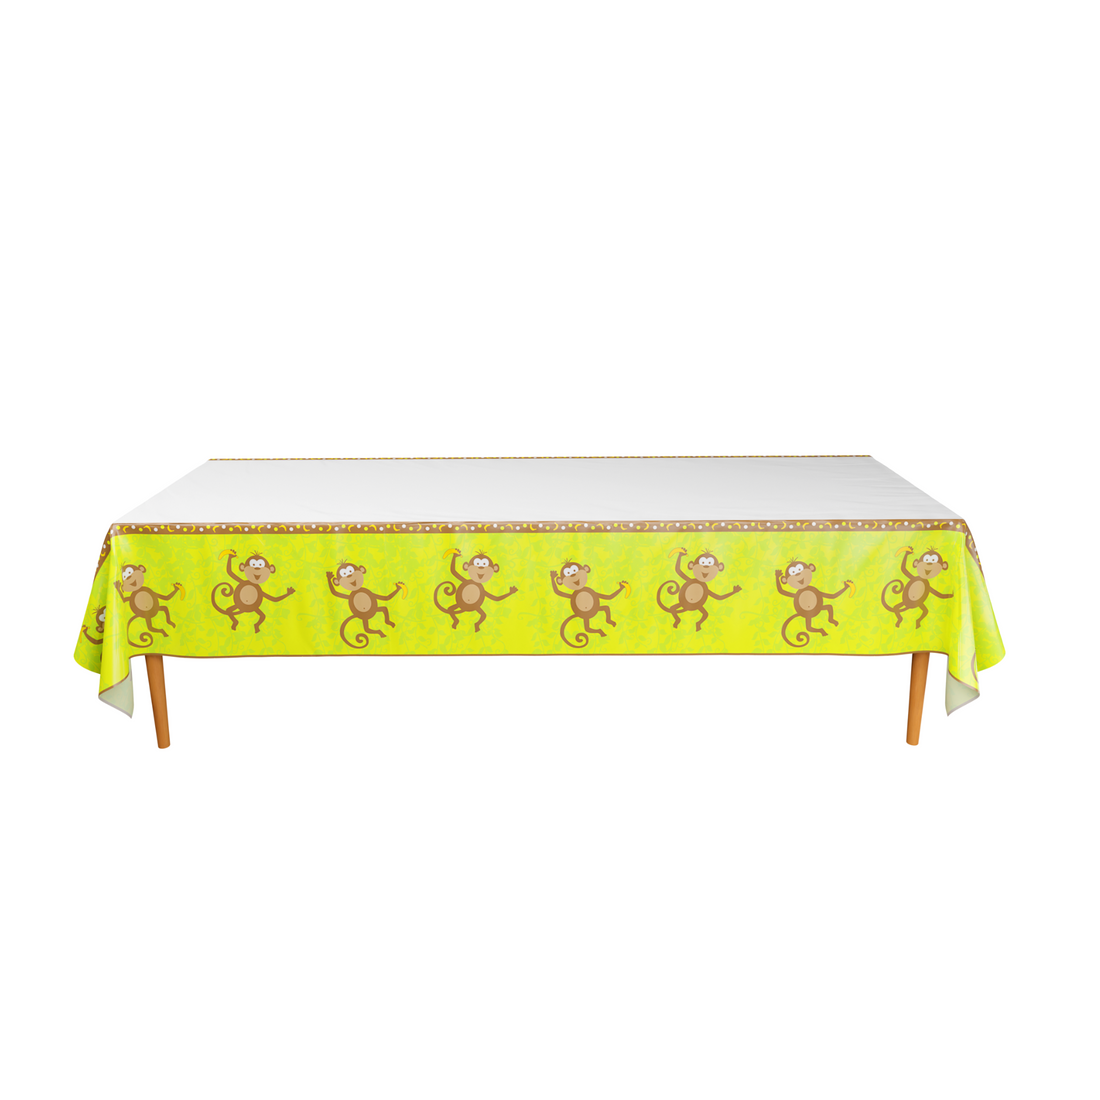 Swing into Fun with Discount Party Supplies' Monkey Table Cover!